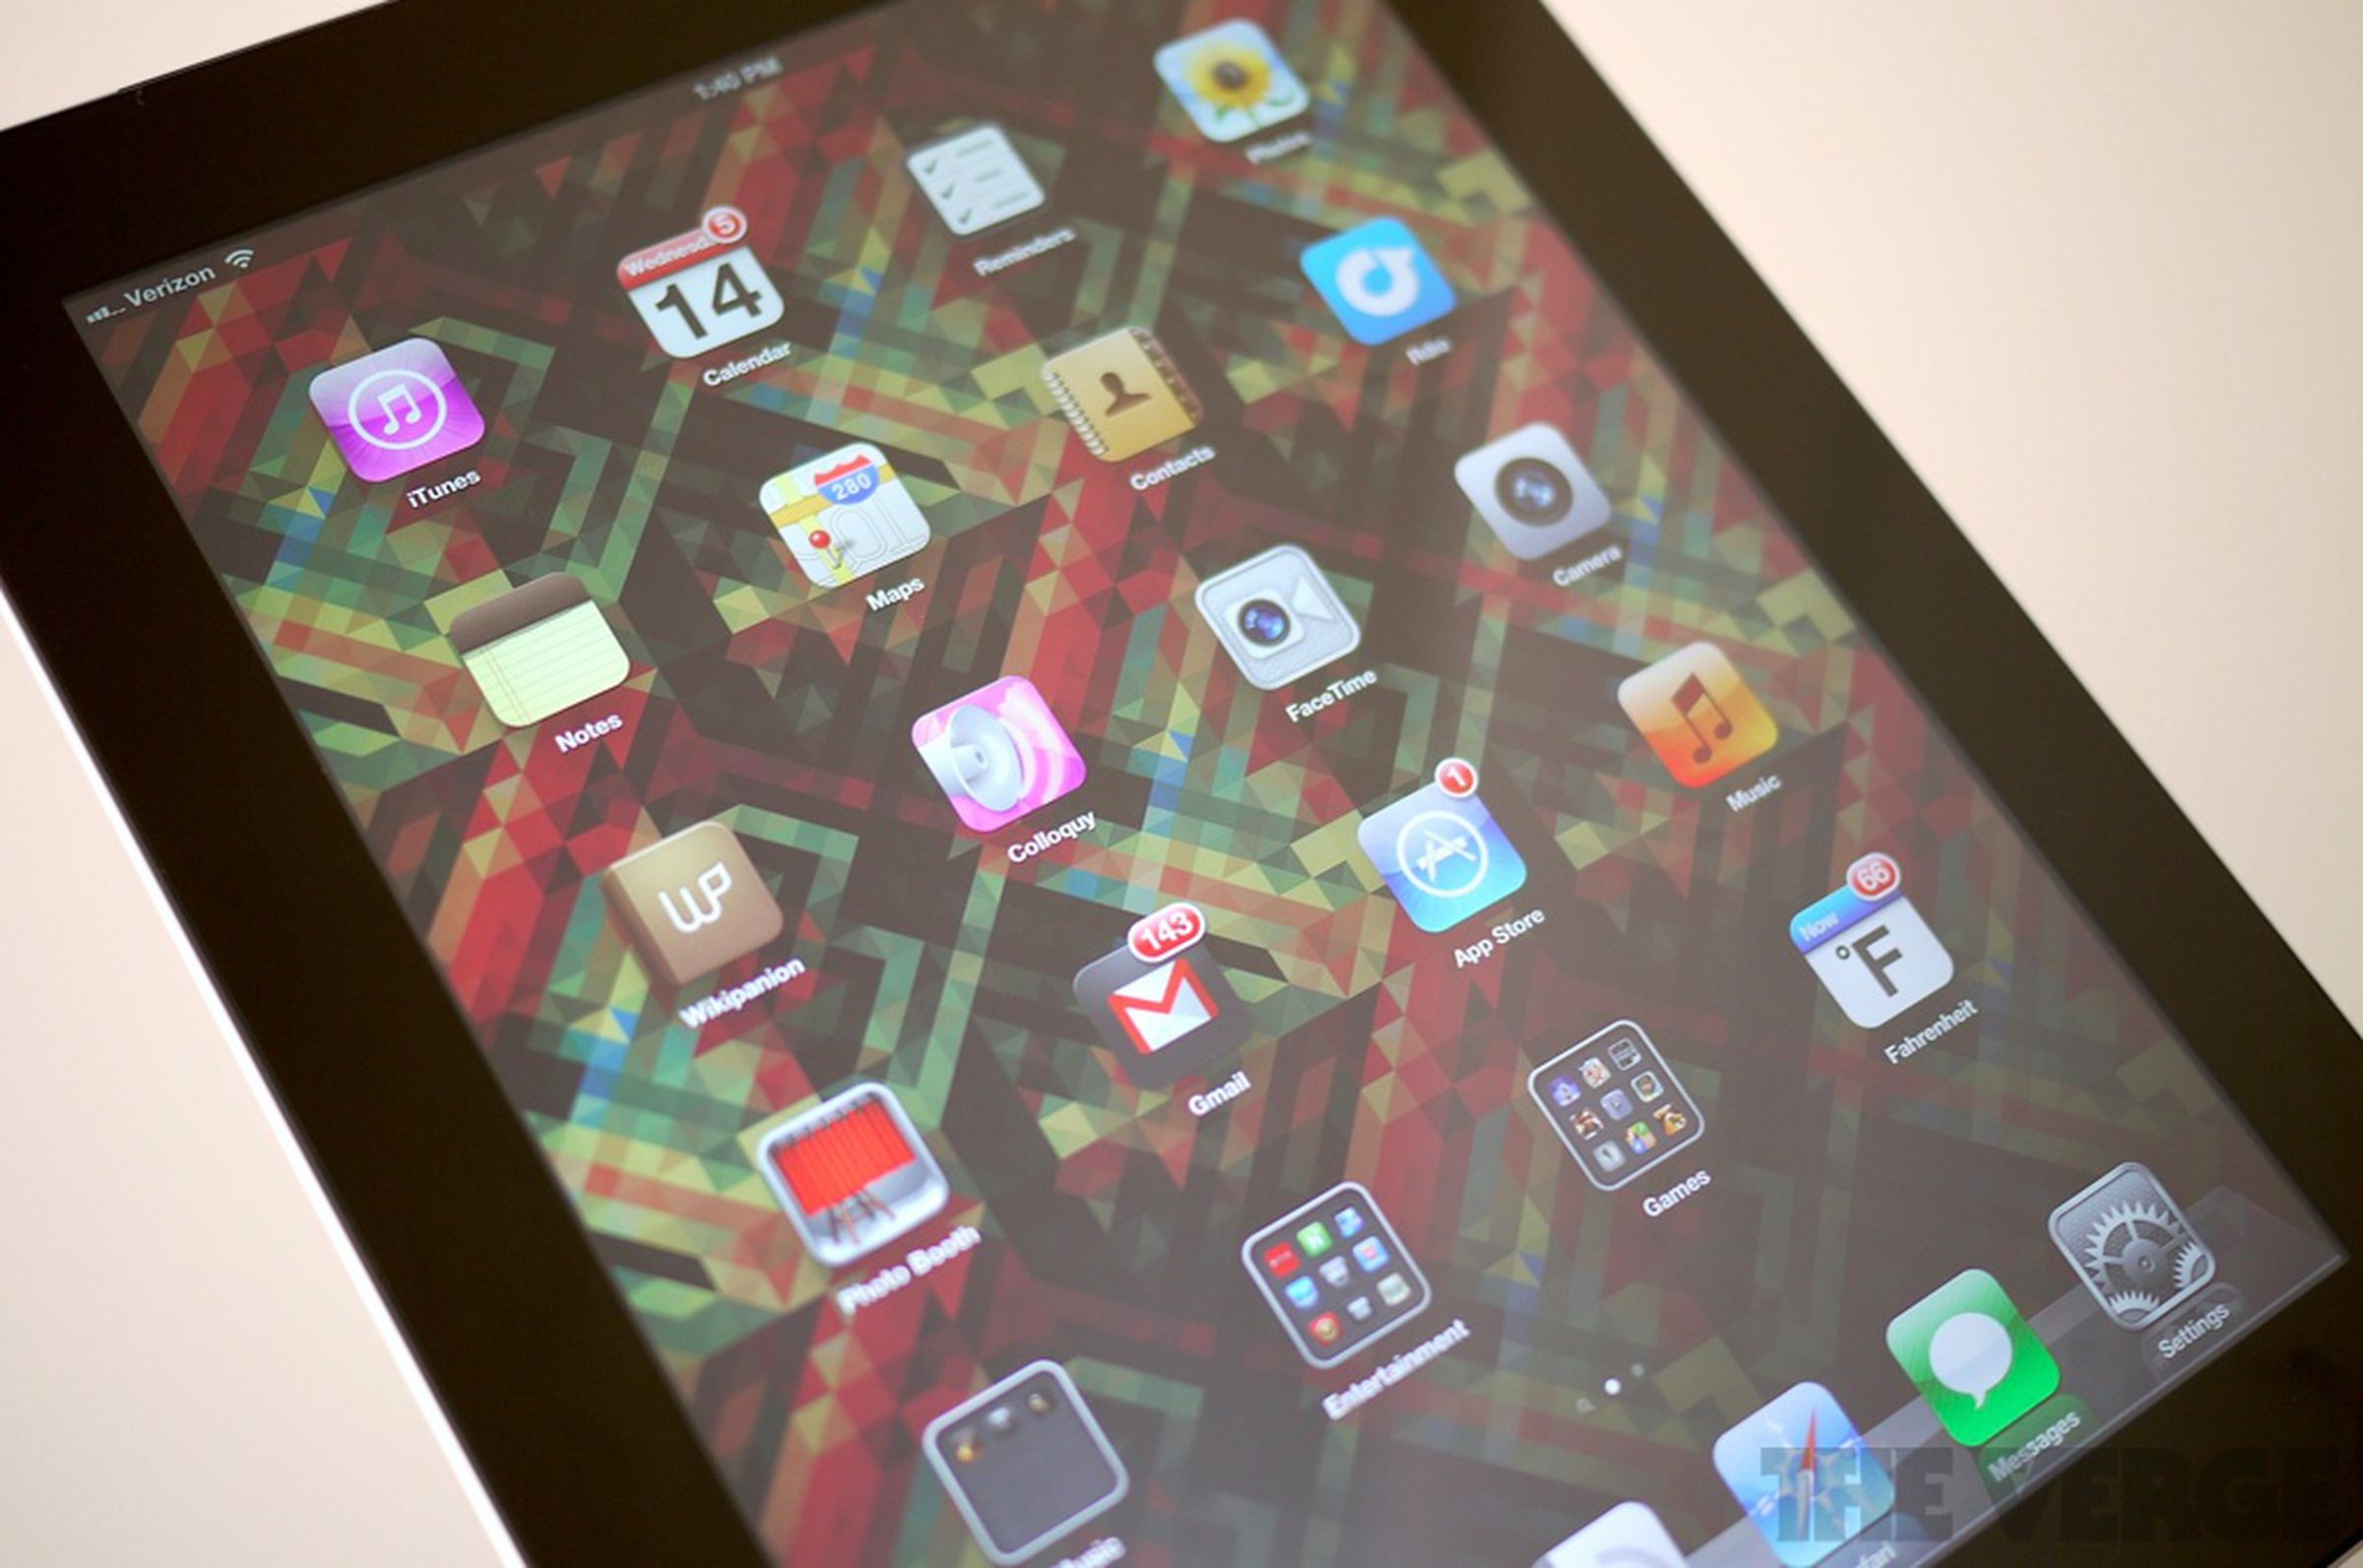 iPad review hardware hands-on